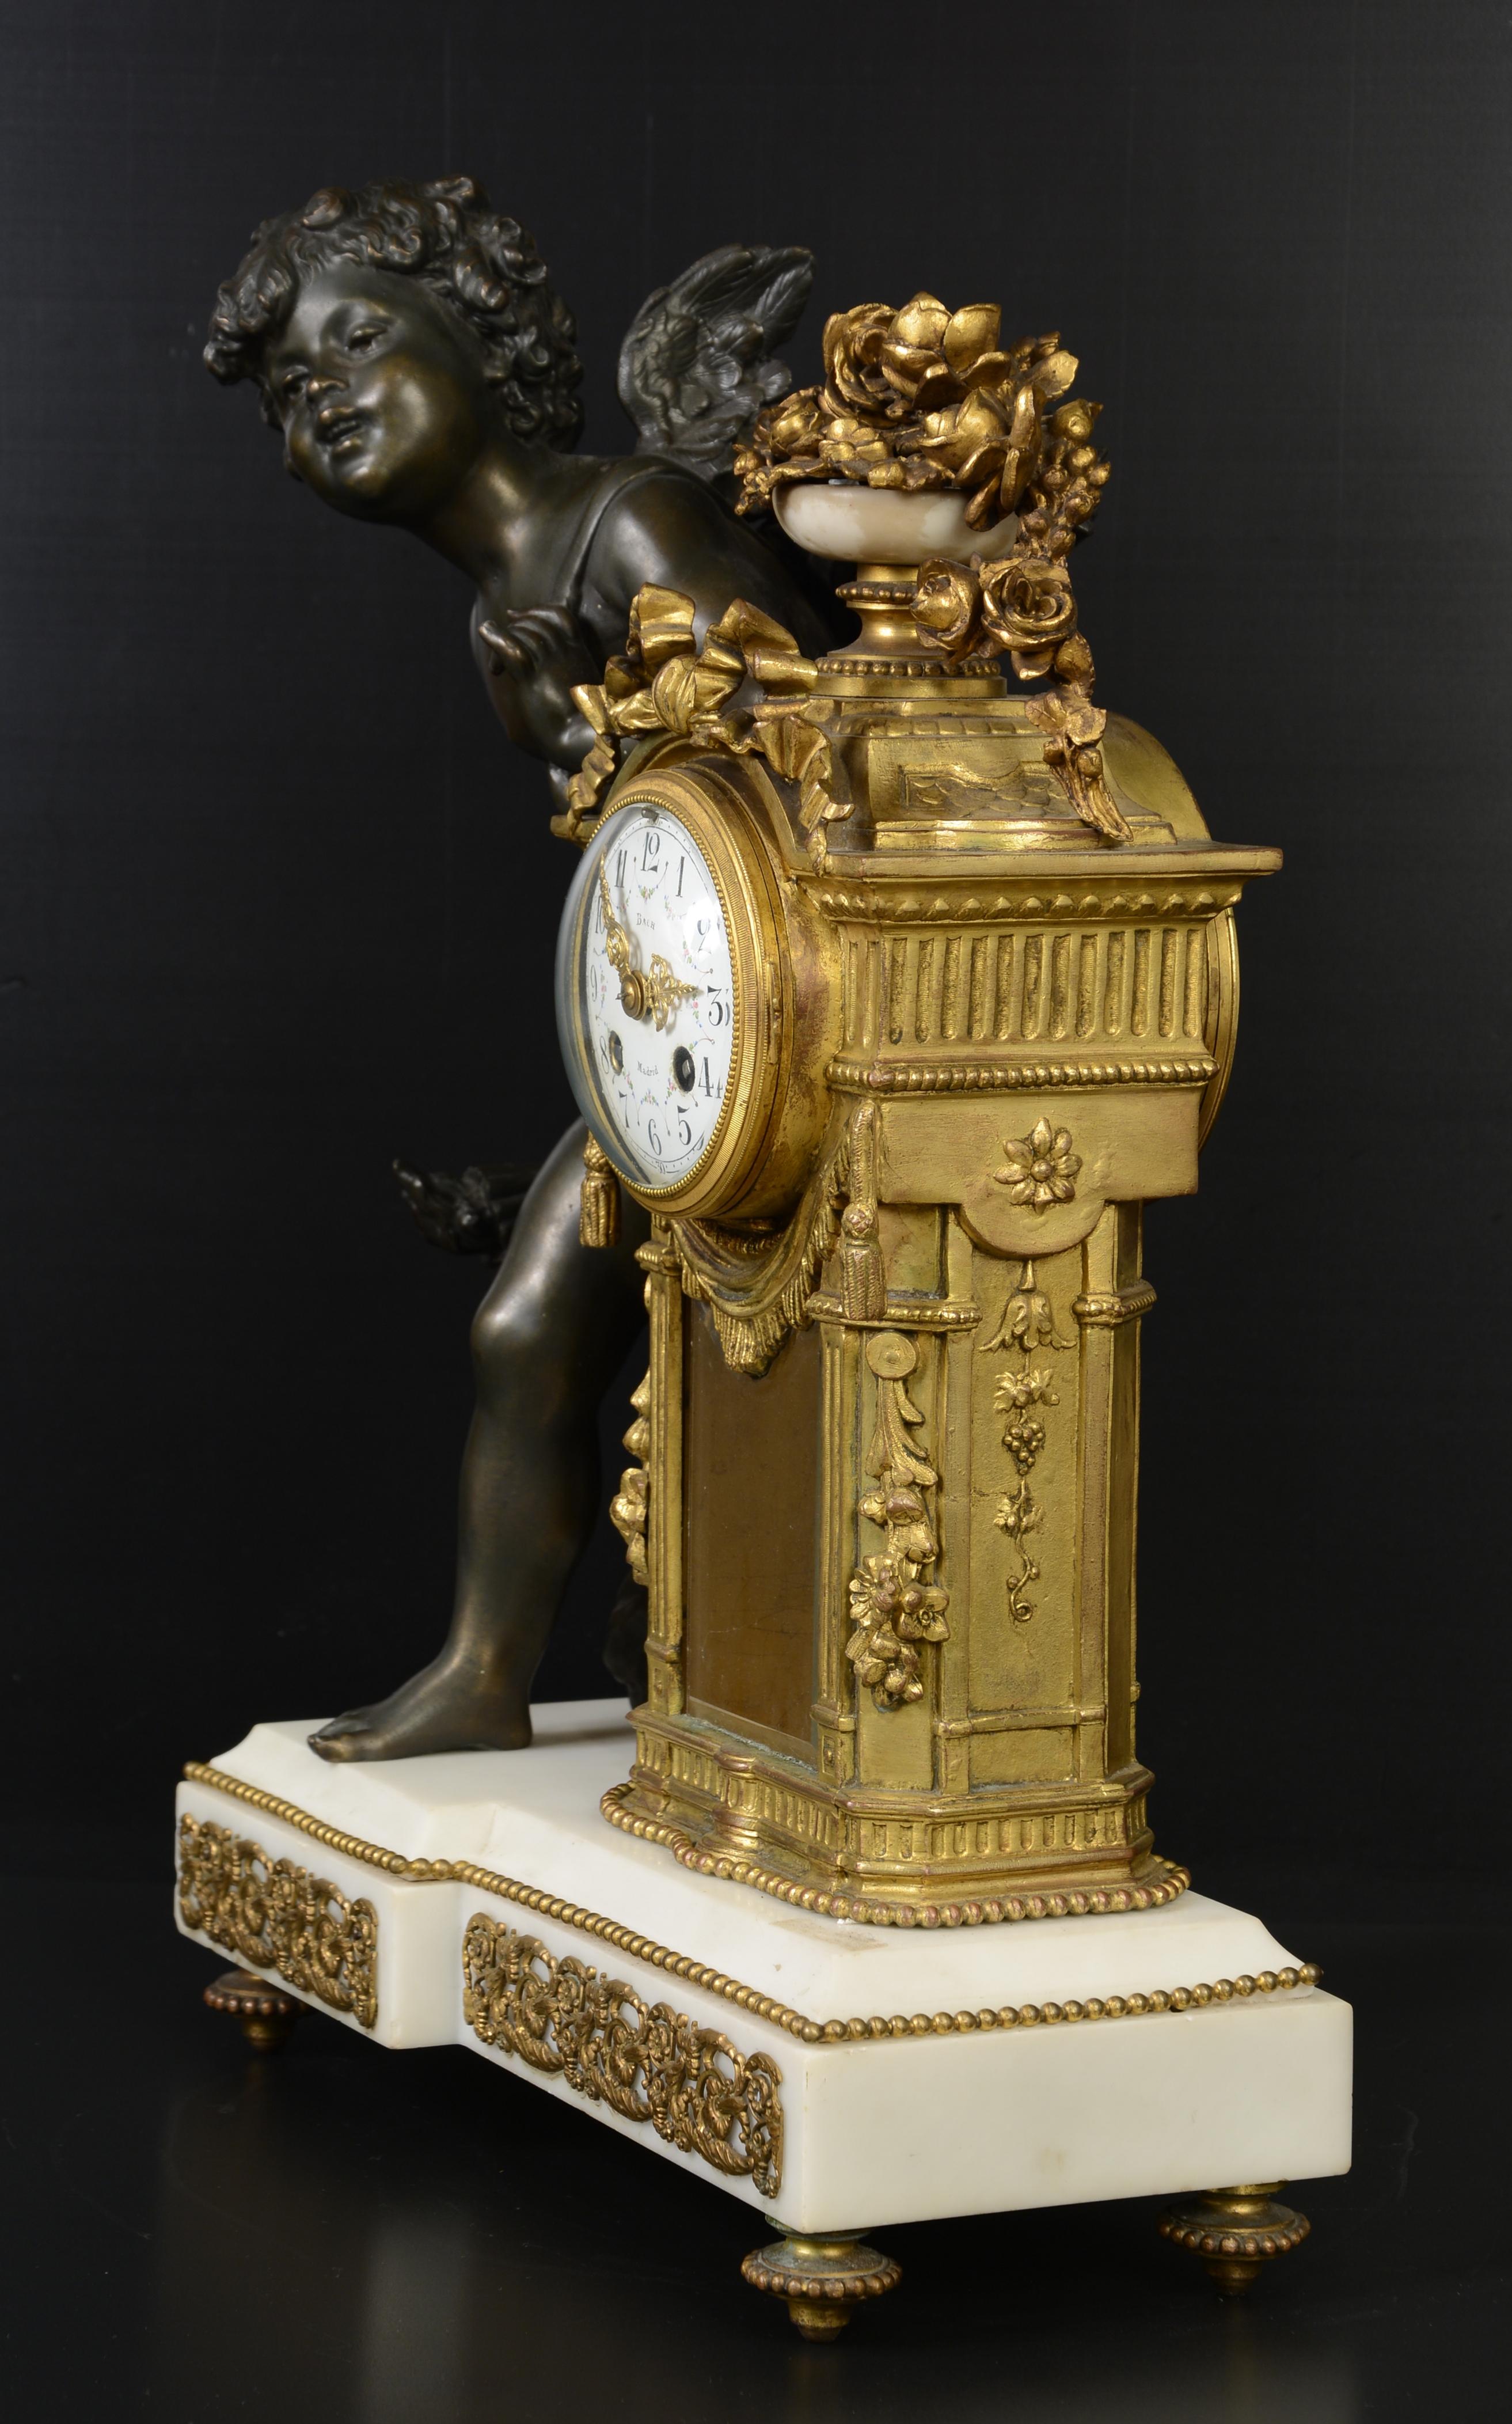 French table clock of the 19th century, with a sculptural design, composed of a base, the clock itself and the large sculpture that accompanies it, with a round shape. It is a classic 